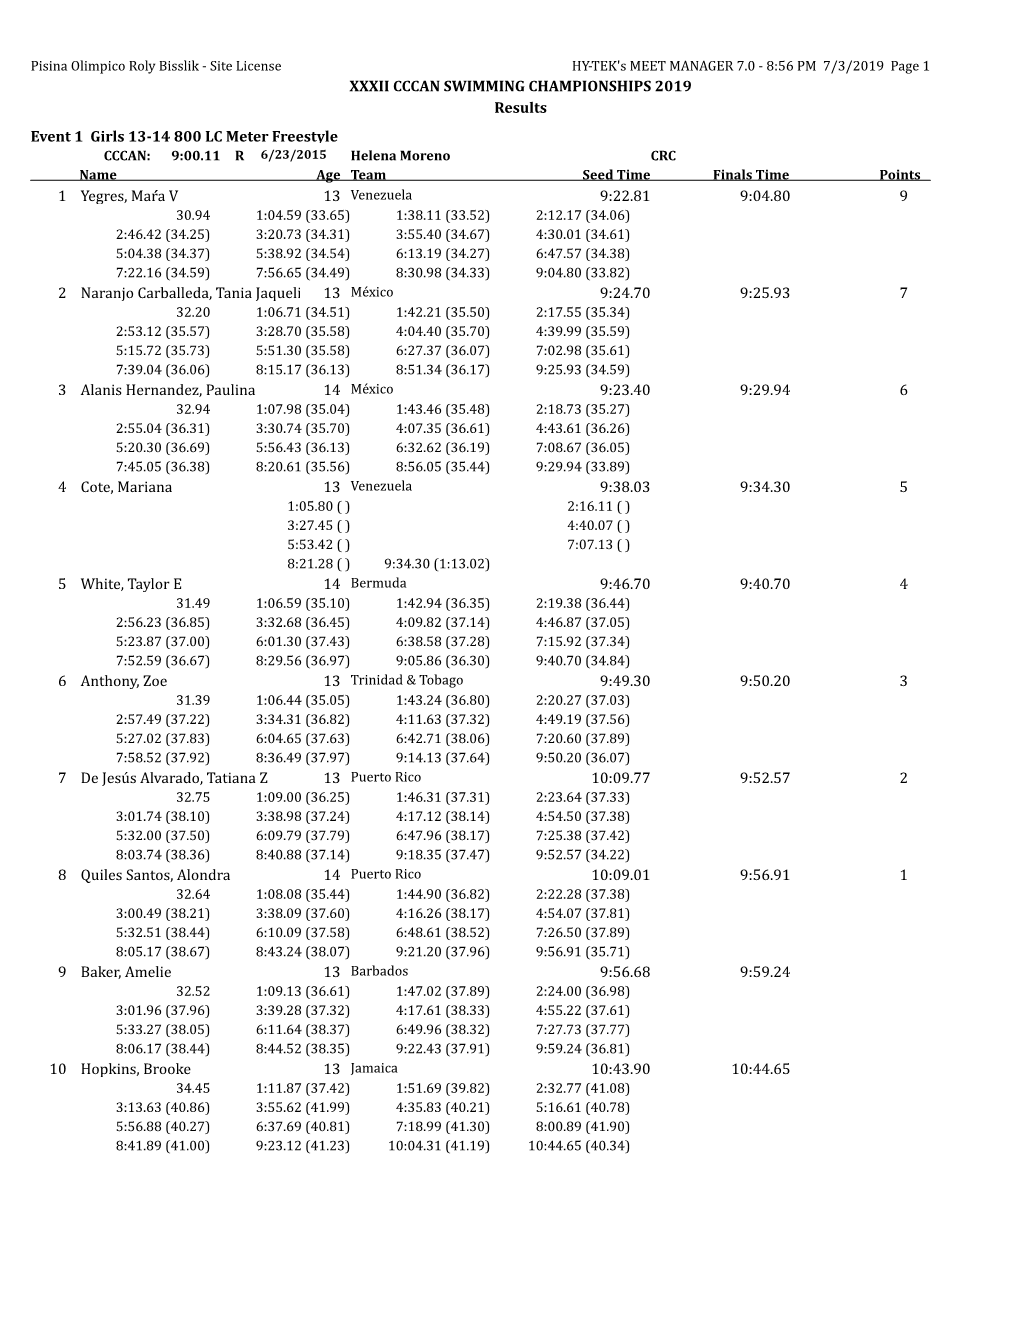 XXXII CCCAN SWIMMING CHAMPIONSHIPS 2019 Results